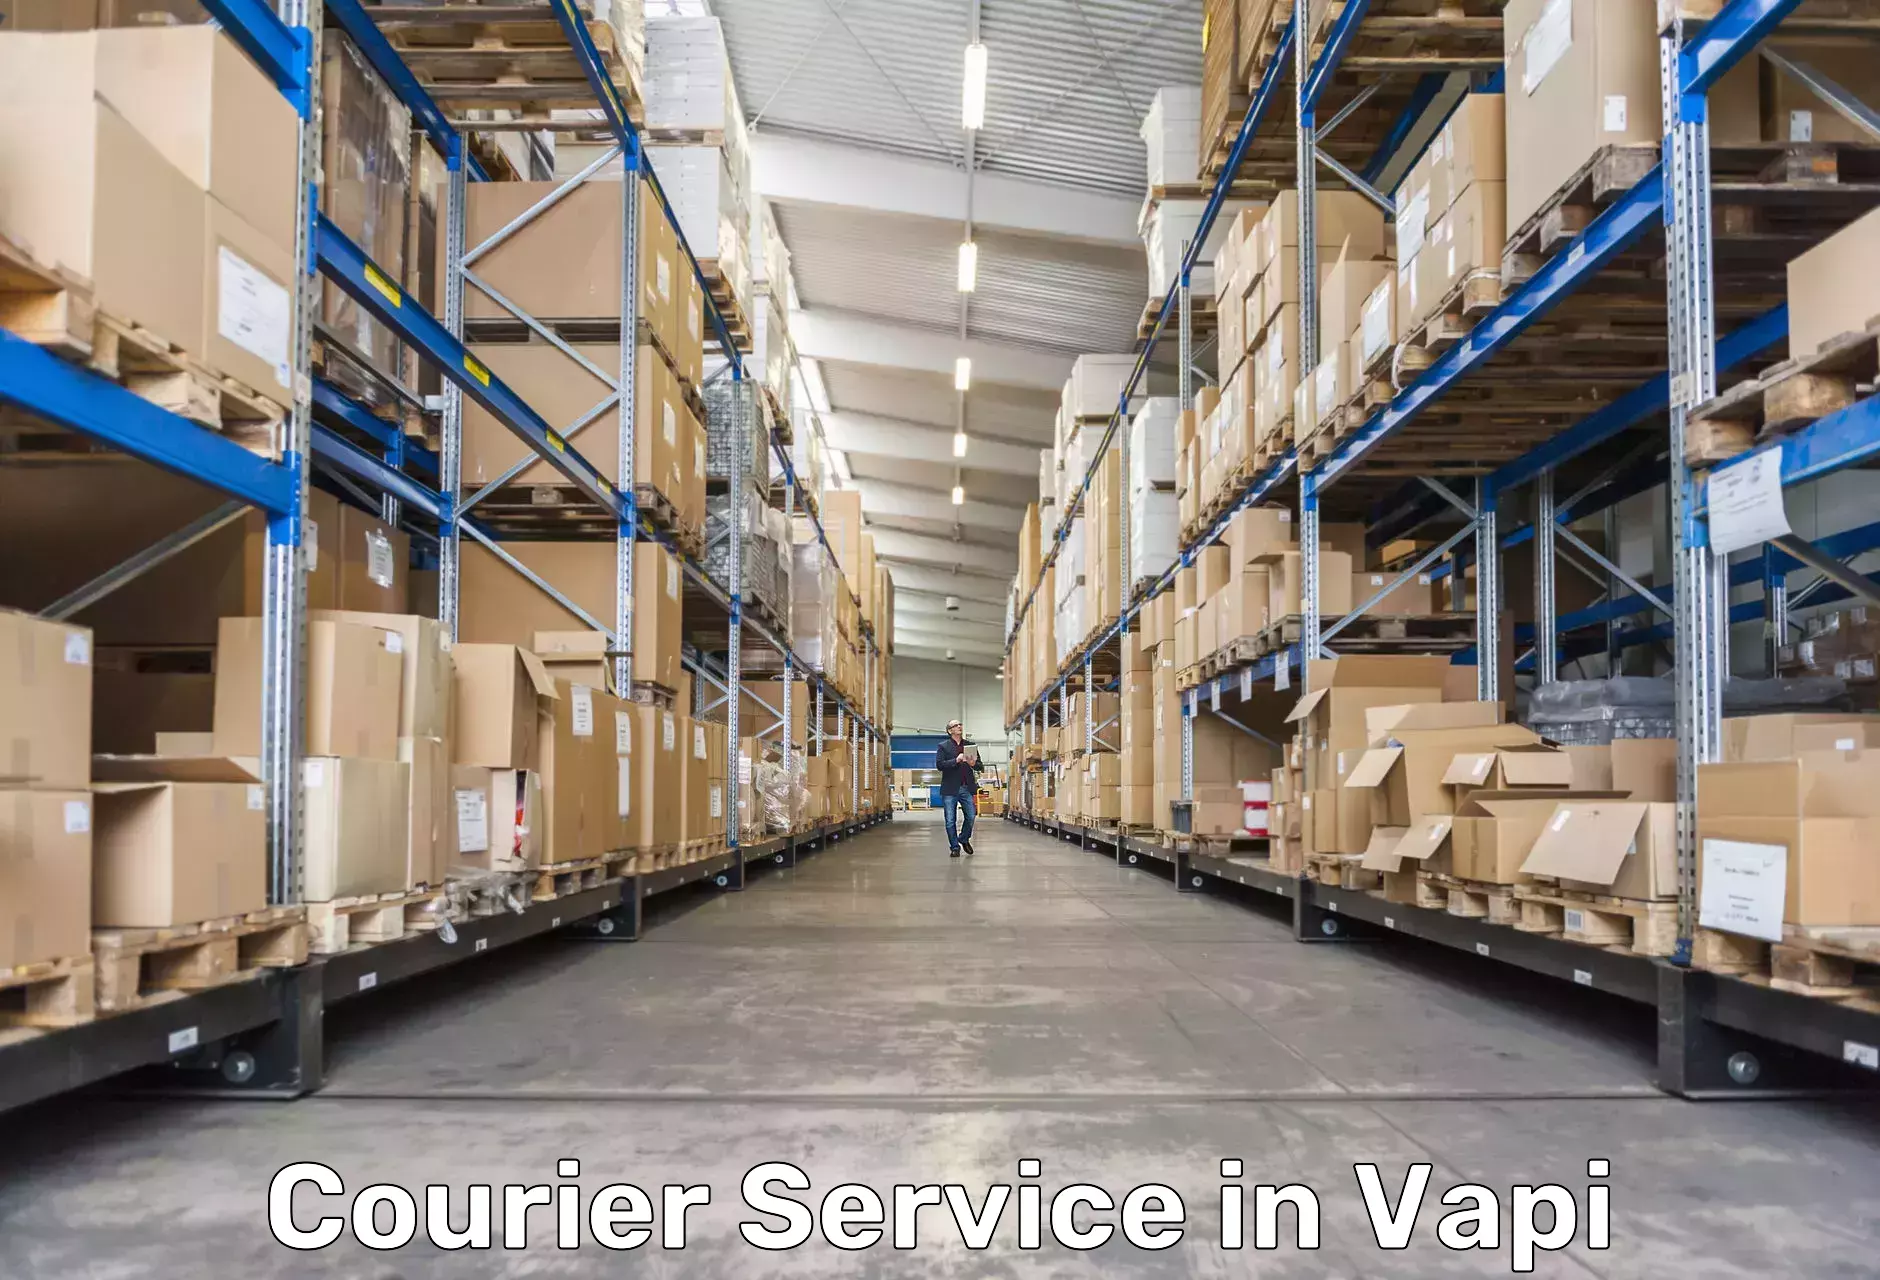 State-of-the-art courier technology in Vapi